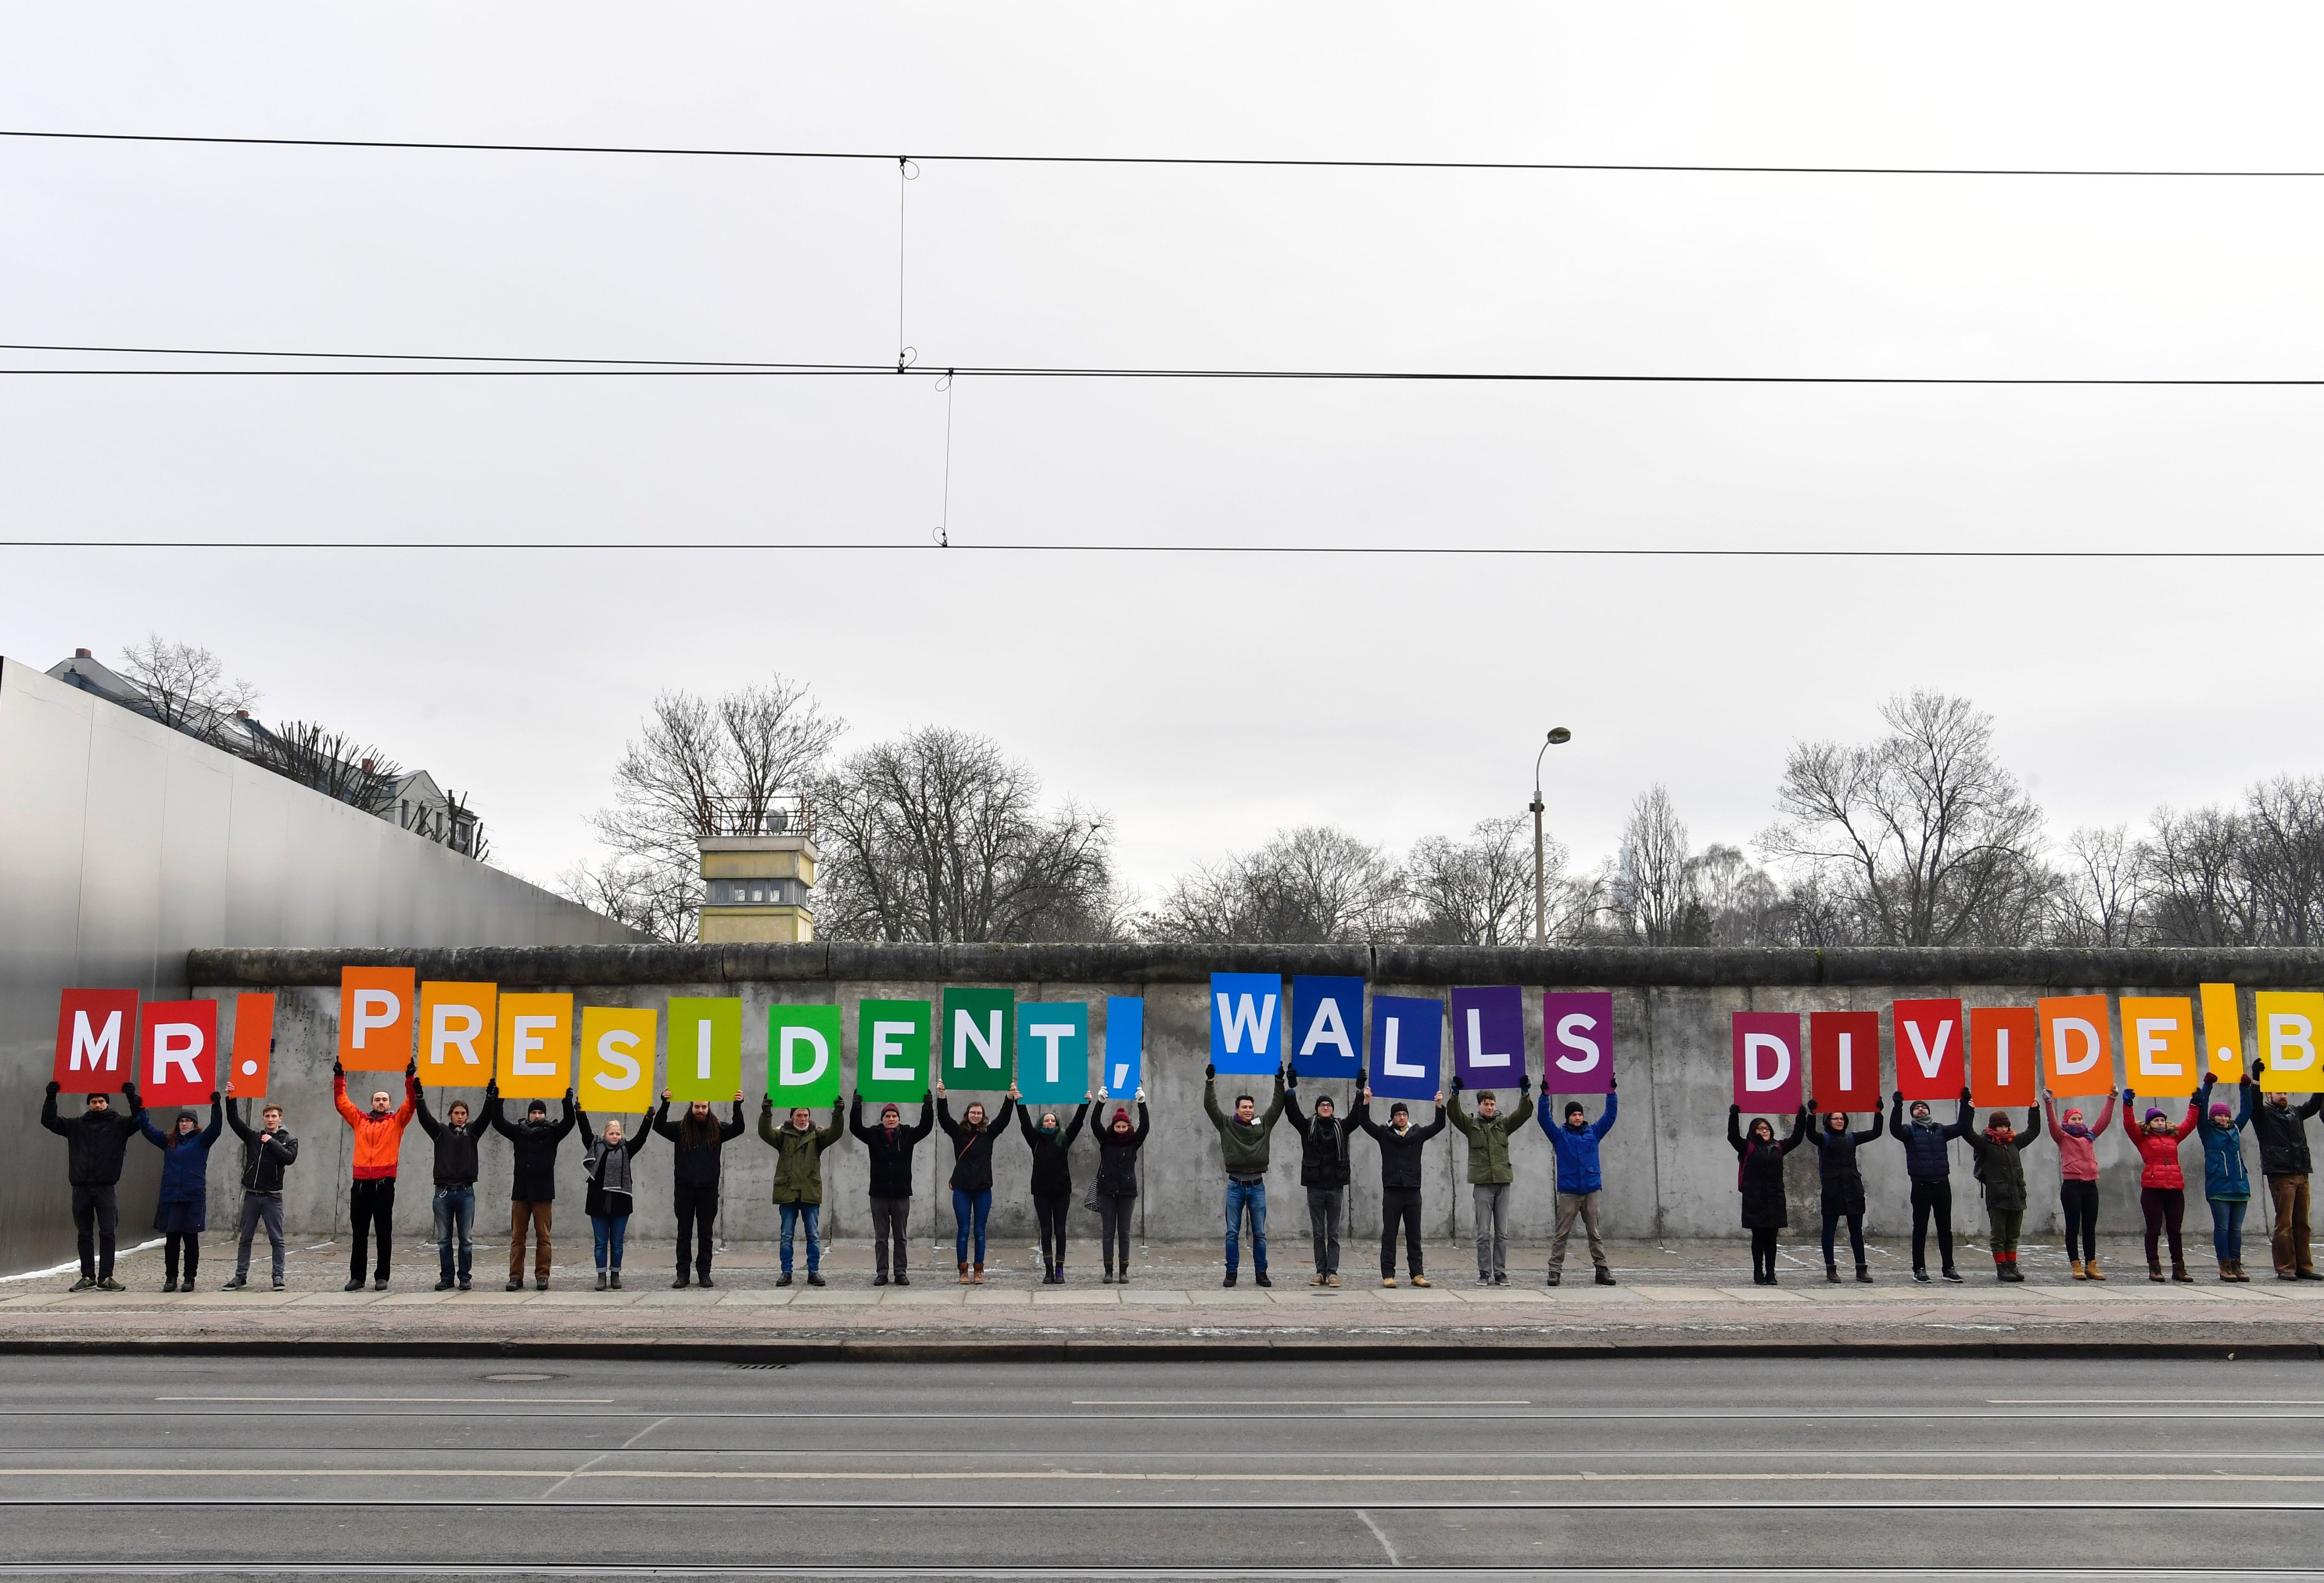 Activists from Greenpeace display a message reading "Mr. President, walls divide. Build Bridges!" along the Berlin wall in Berlin on Jan. 20, 2017 to coincide with the inauguration of U.S. President Donald Trump. (John MacDougall—AFP/Getty Images)